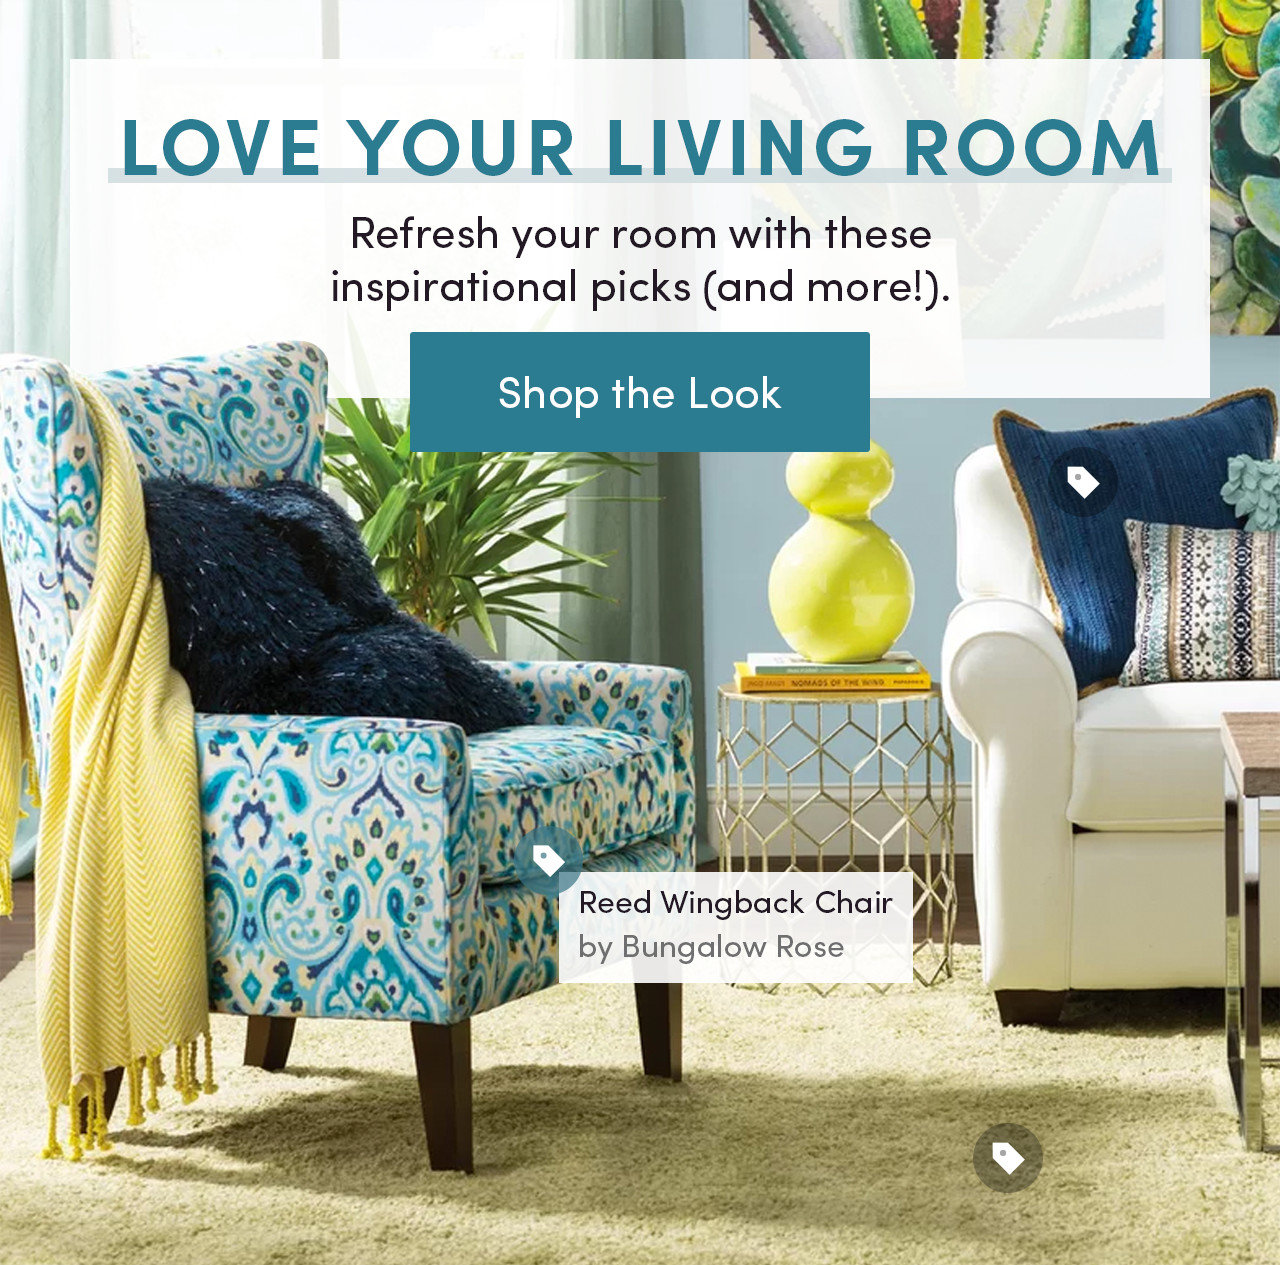 Love Your Living Room - Refresh your room with these inspirational picks (and more!).